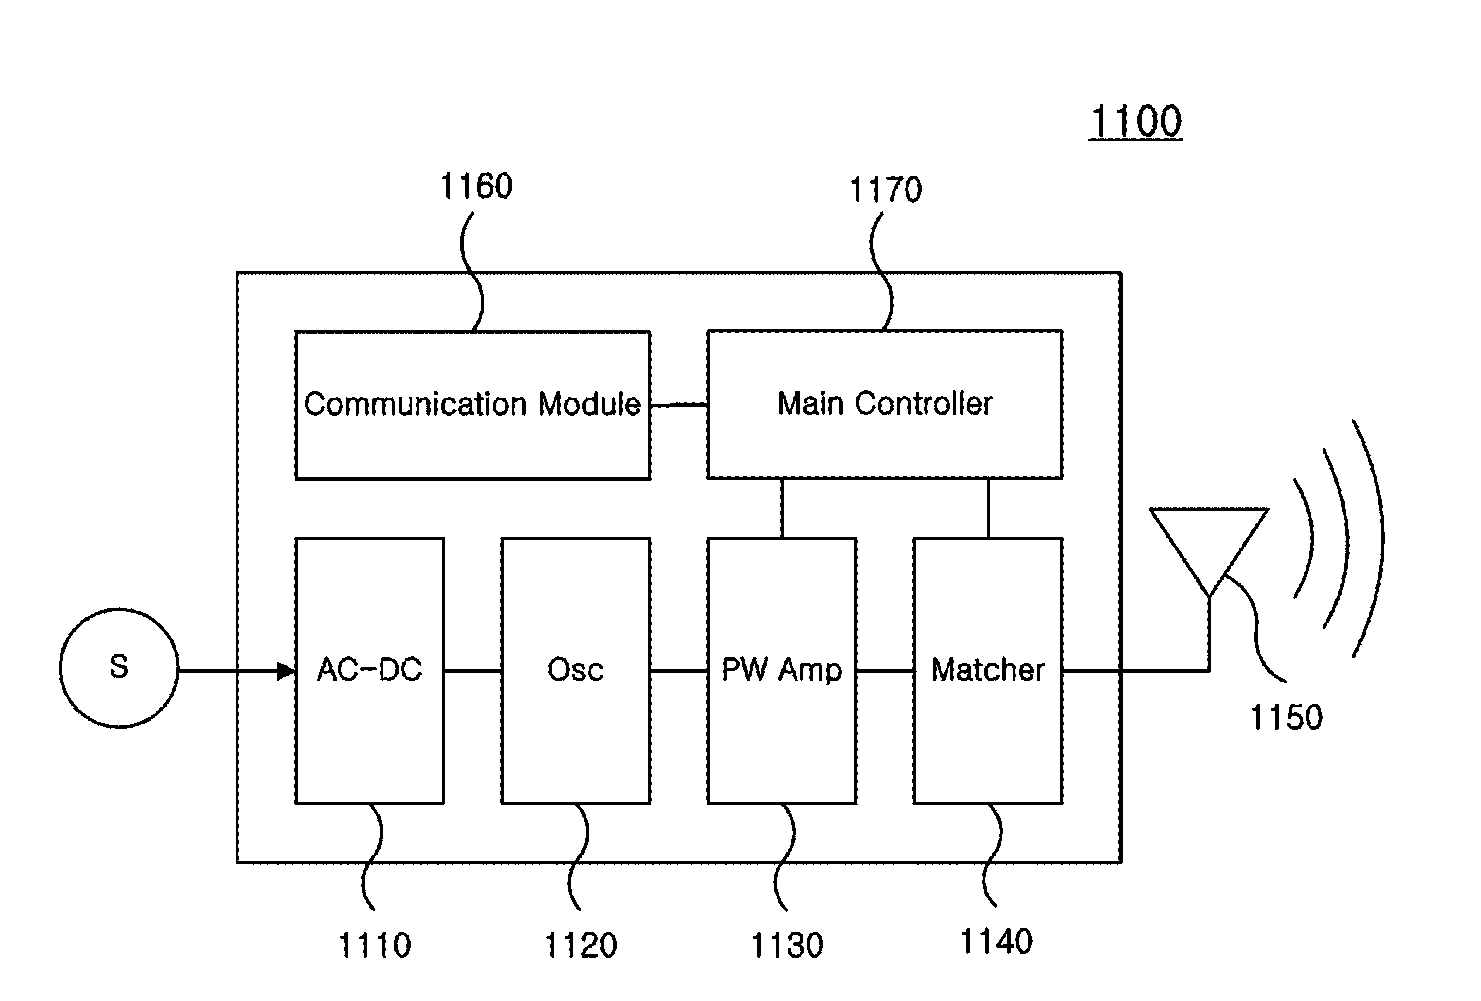 Apparatus and method for transmitting wireless power